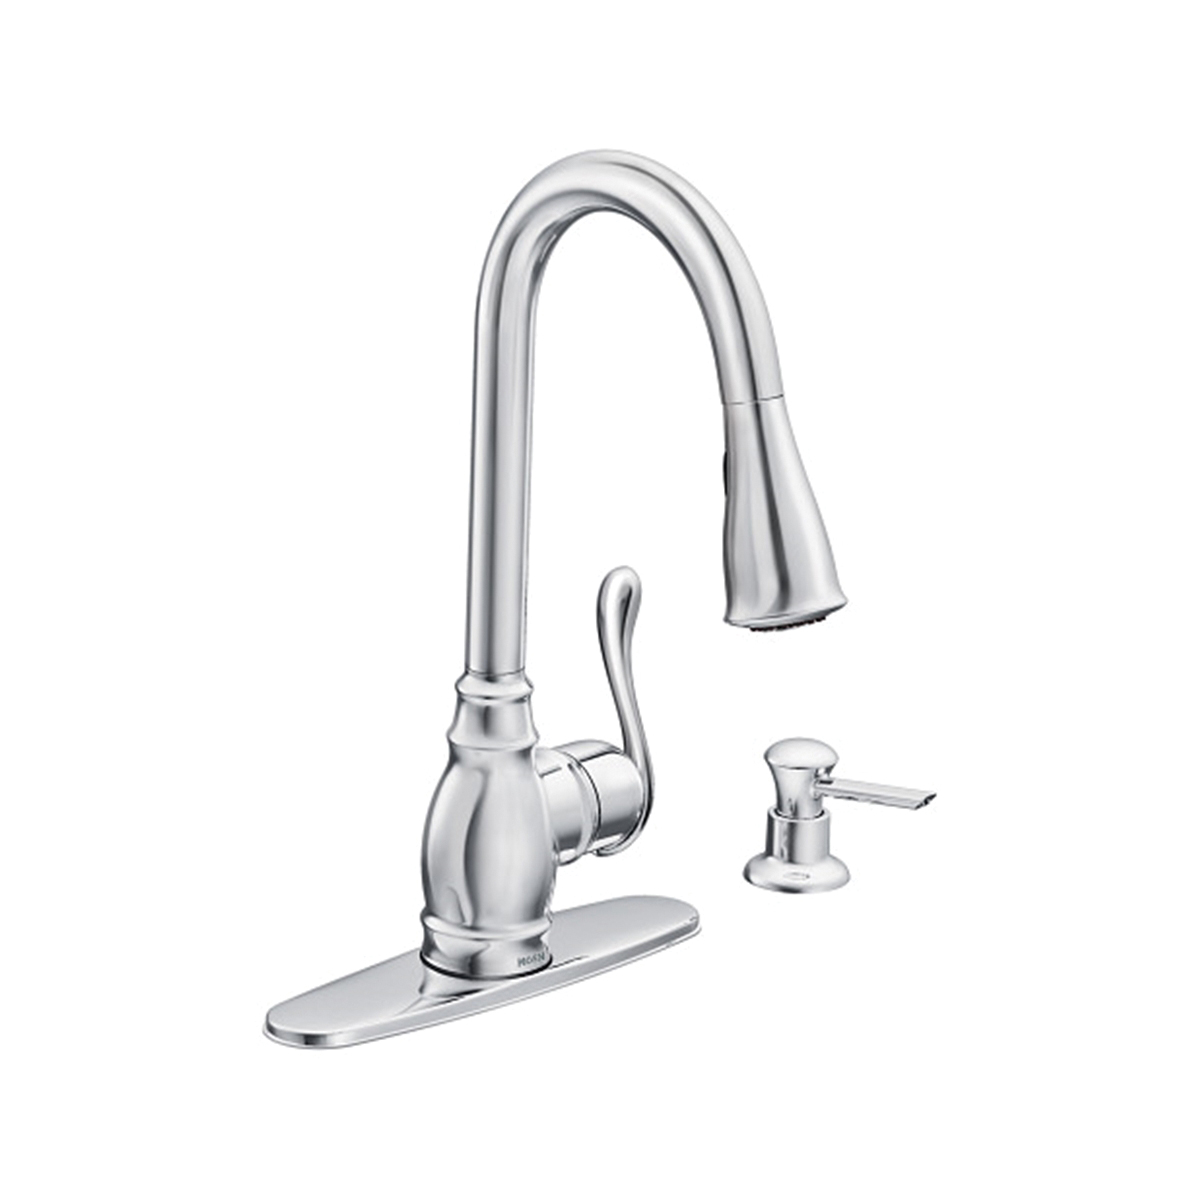 Anabelle Series CA87003 Pull-Down Kitchen Faucet, 1.5 gpm, 1-Faucet Handle, 1-Faucet Hole, Metal, Chrome Plated